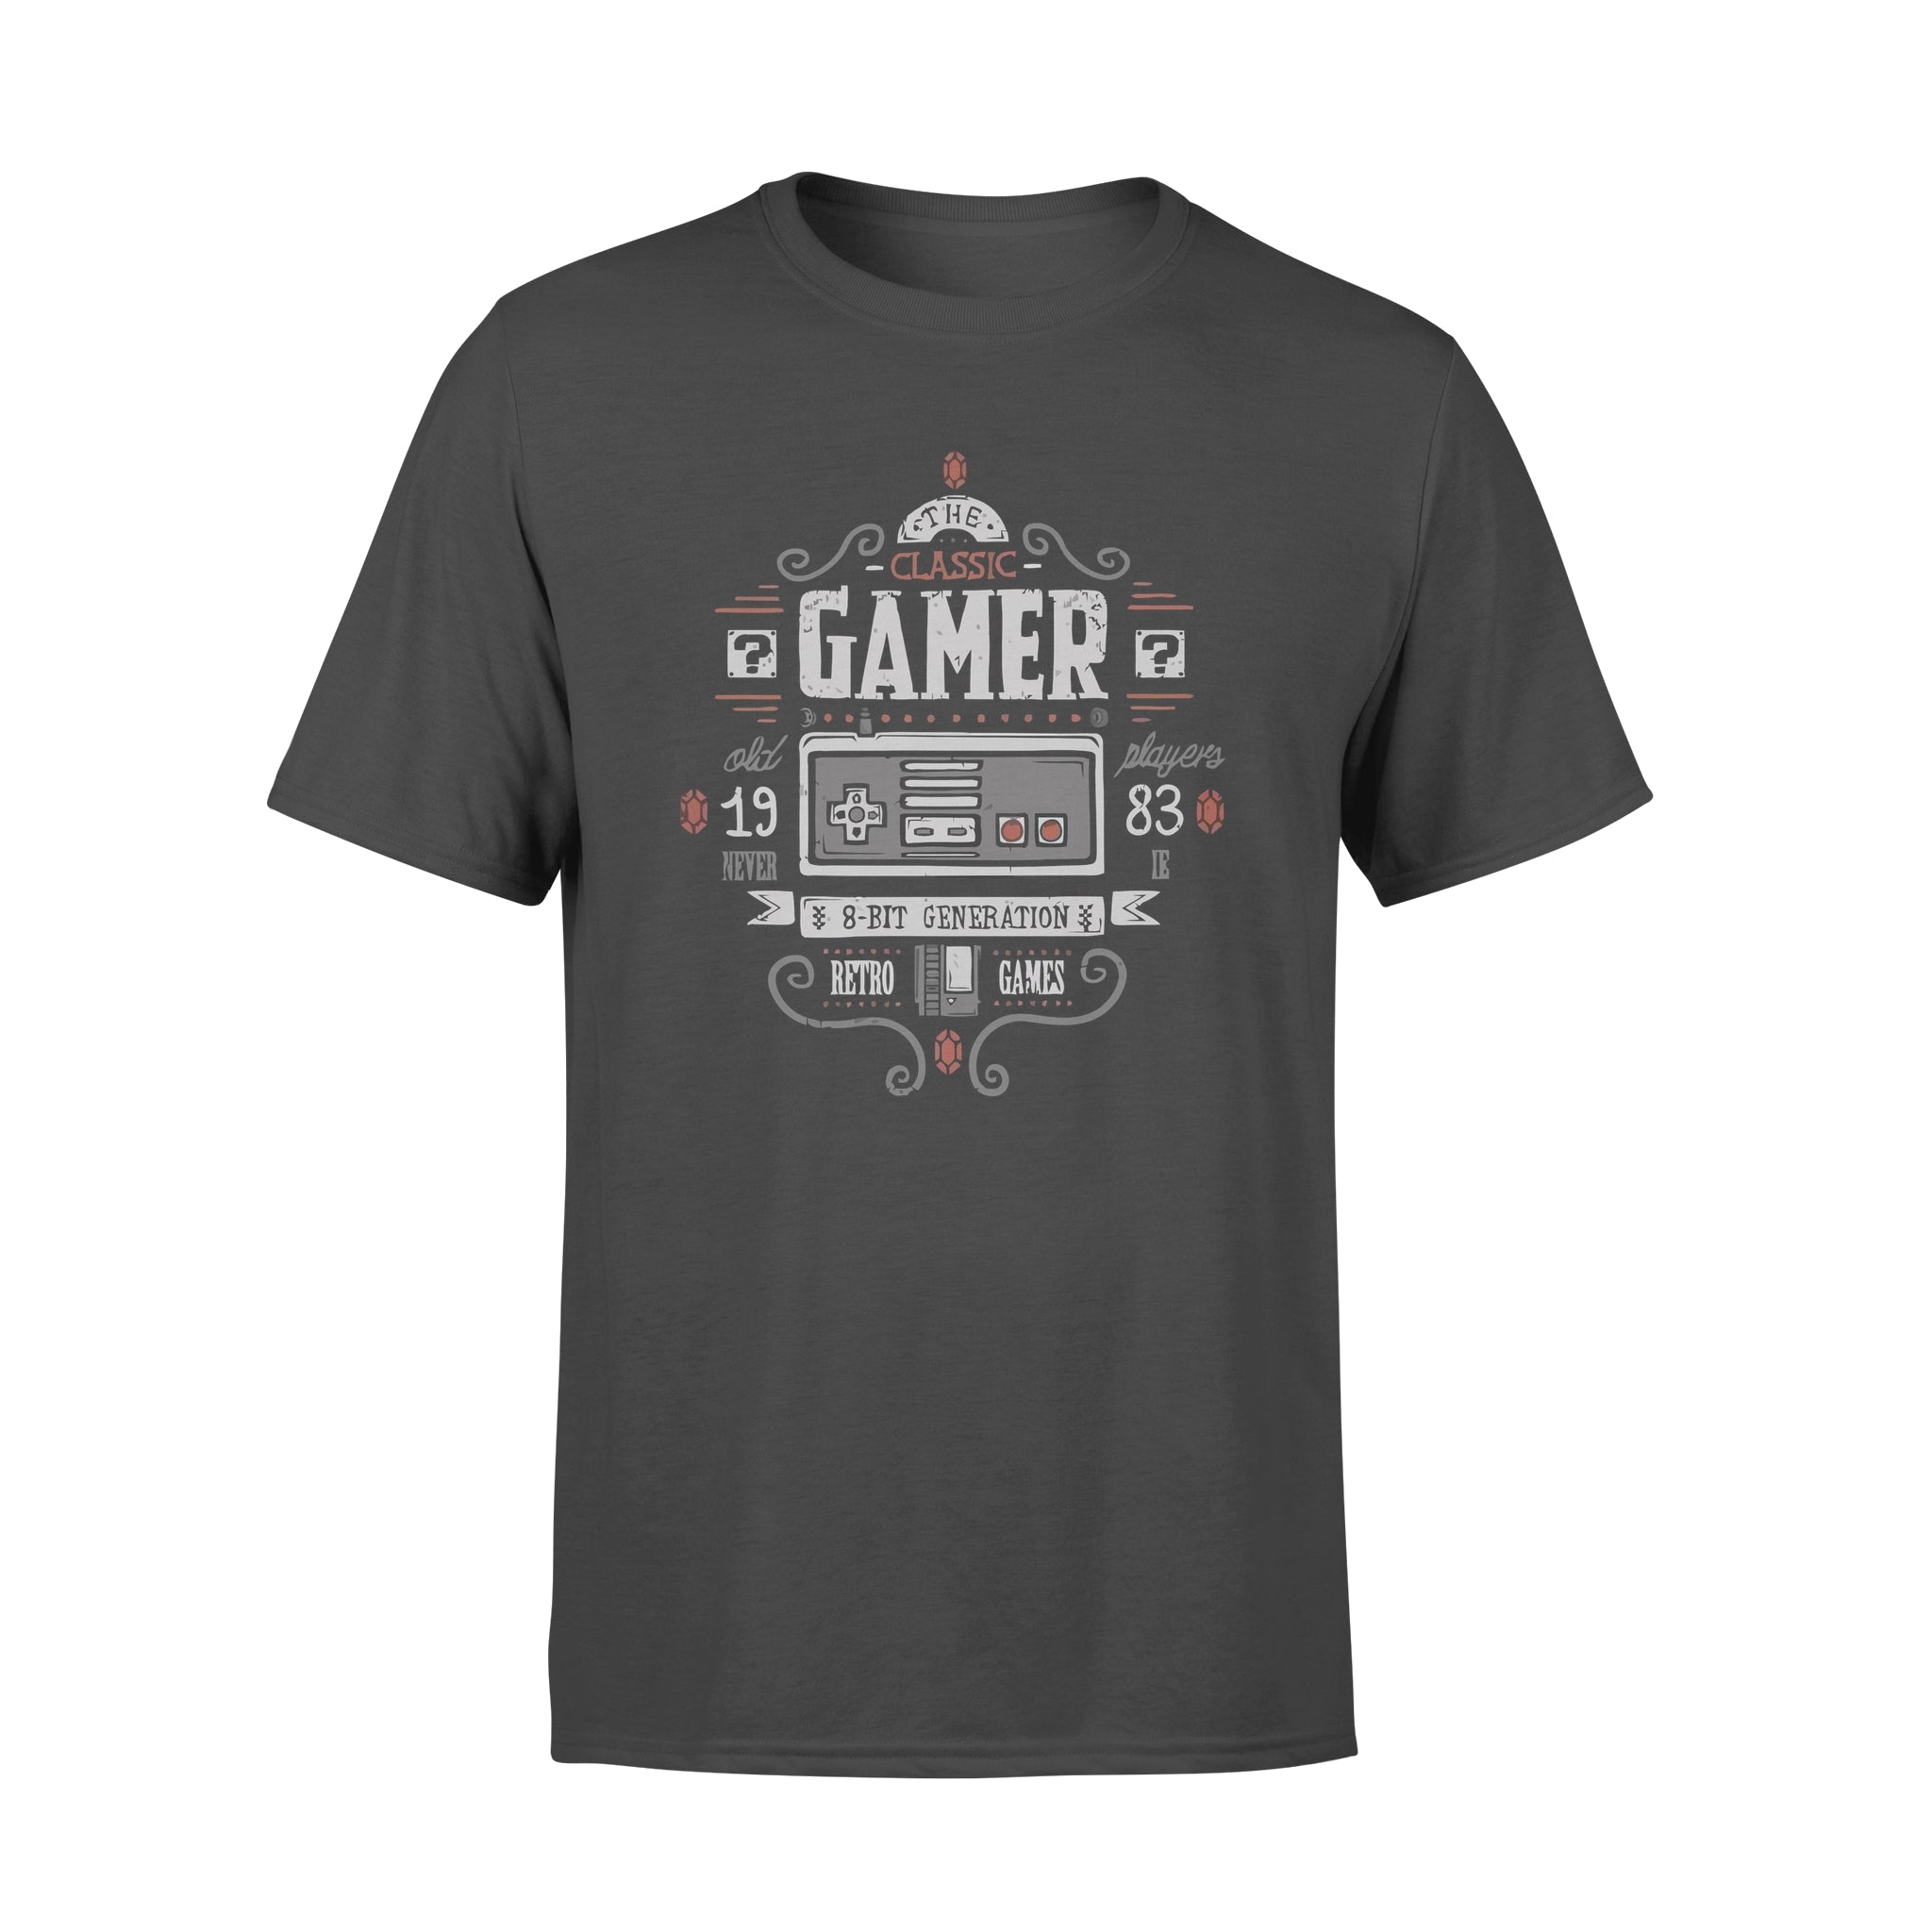 The Old Gamer - T-shirt